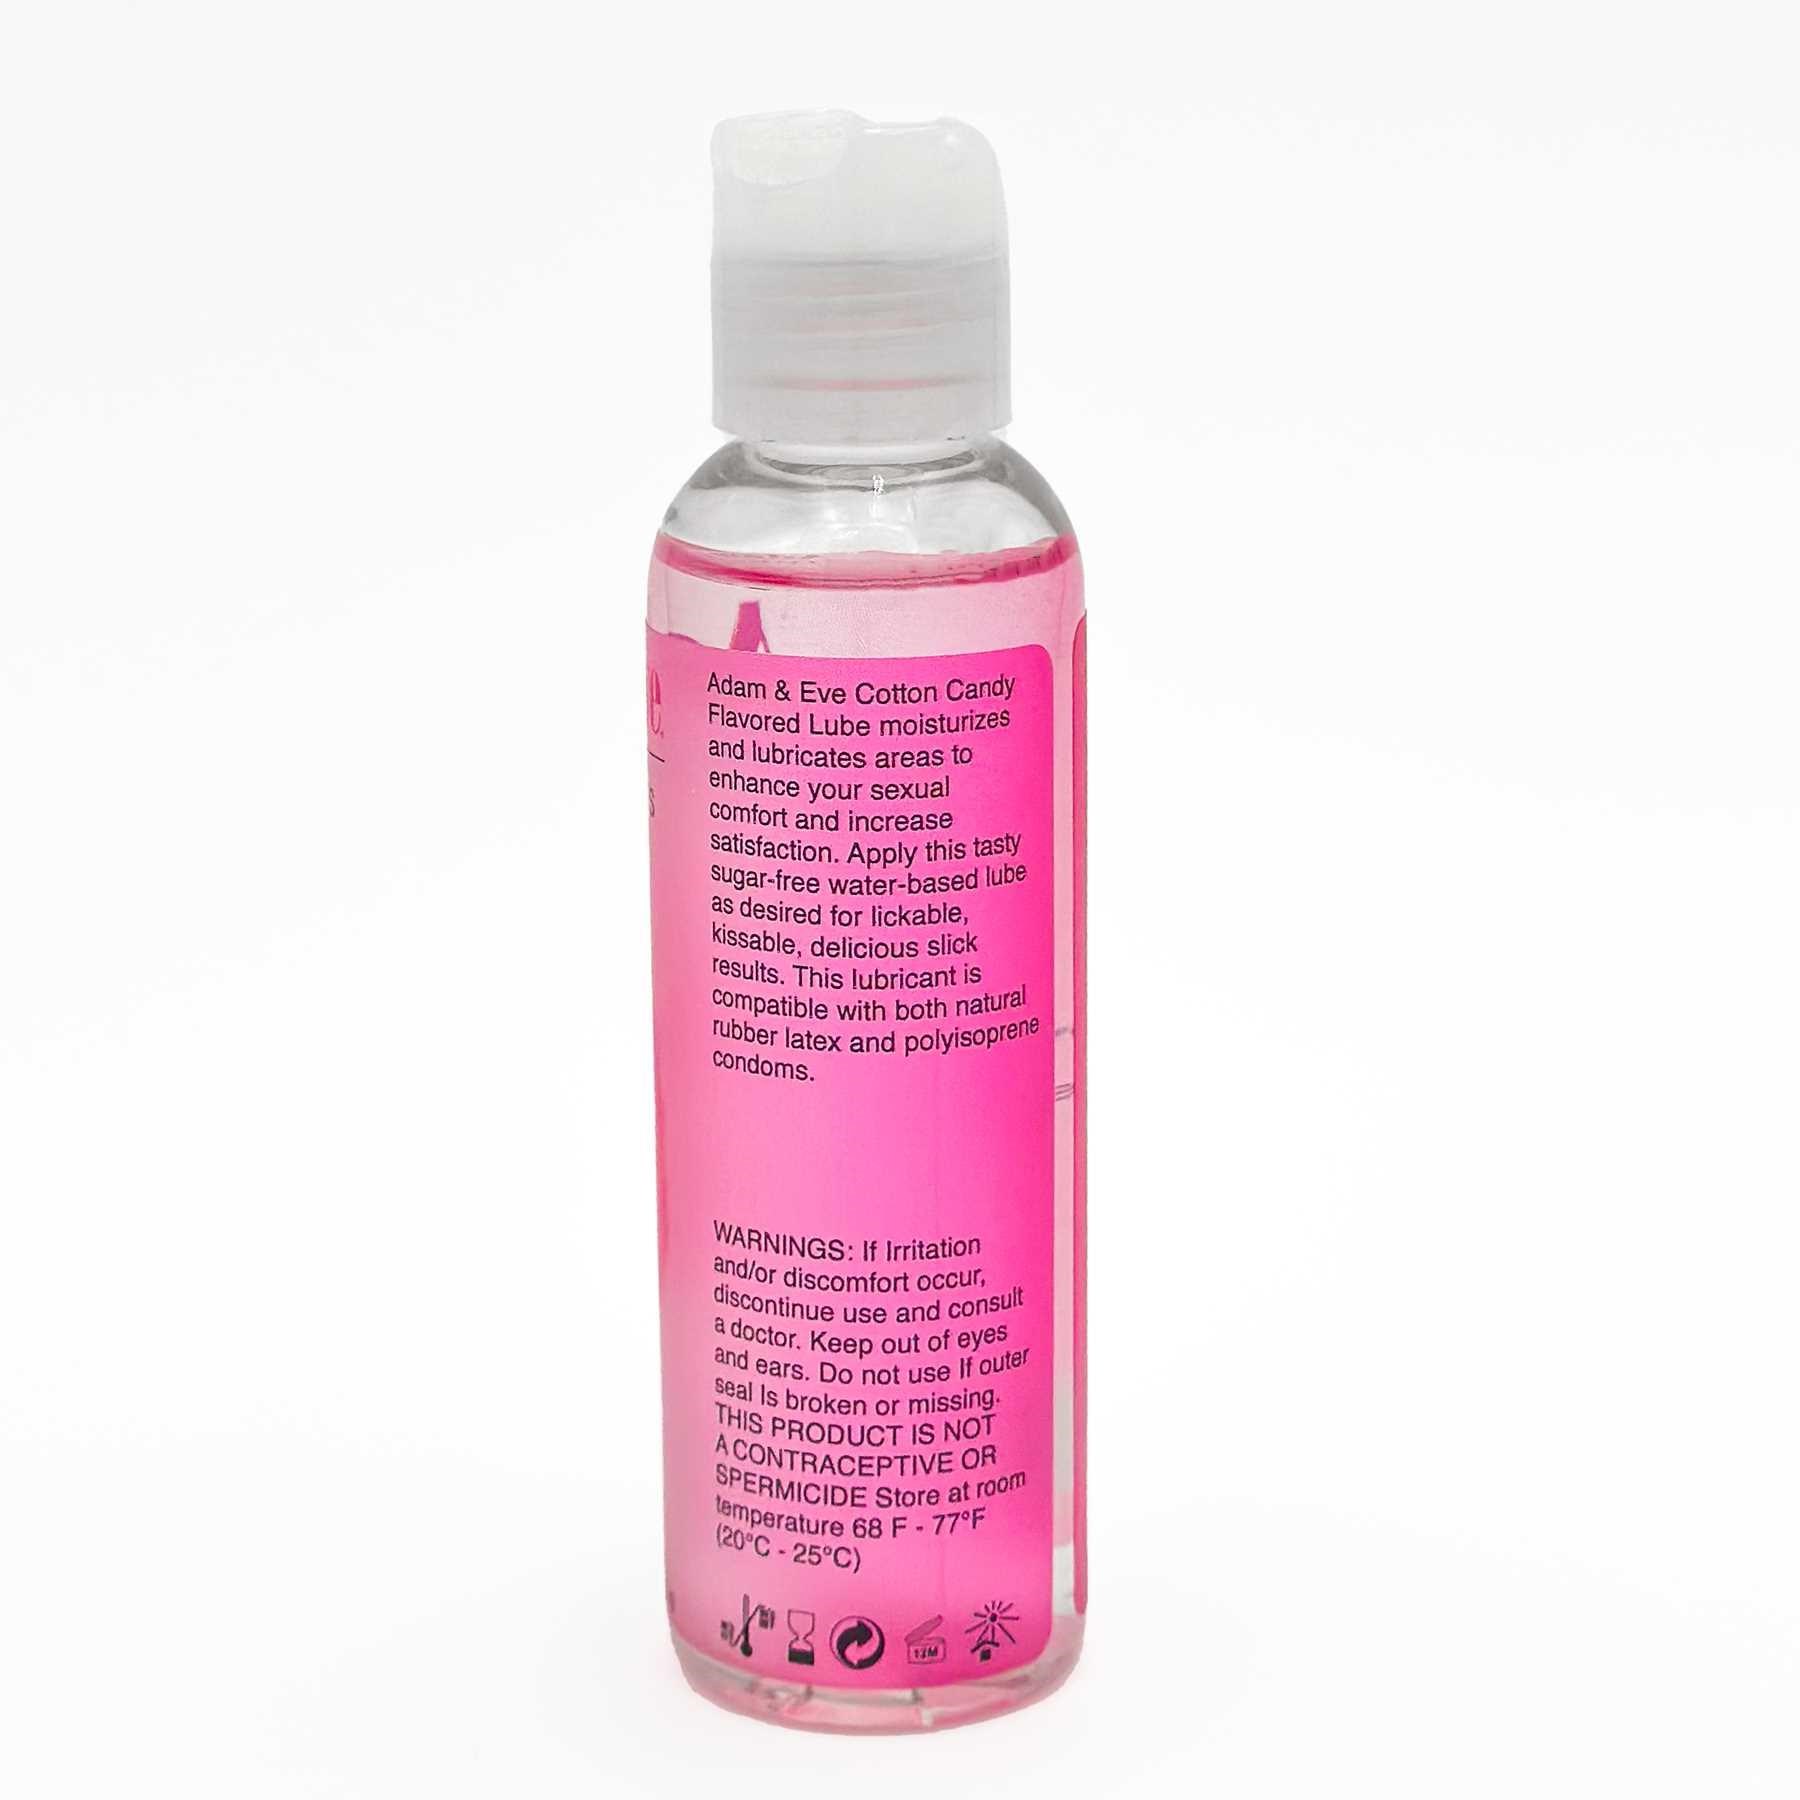 Adam & Eve Flavored Lubricants cotton candy side of bottle